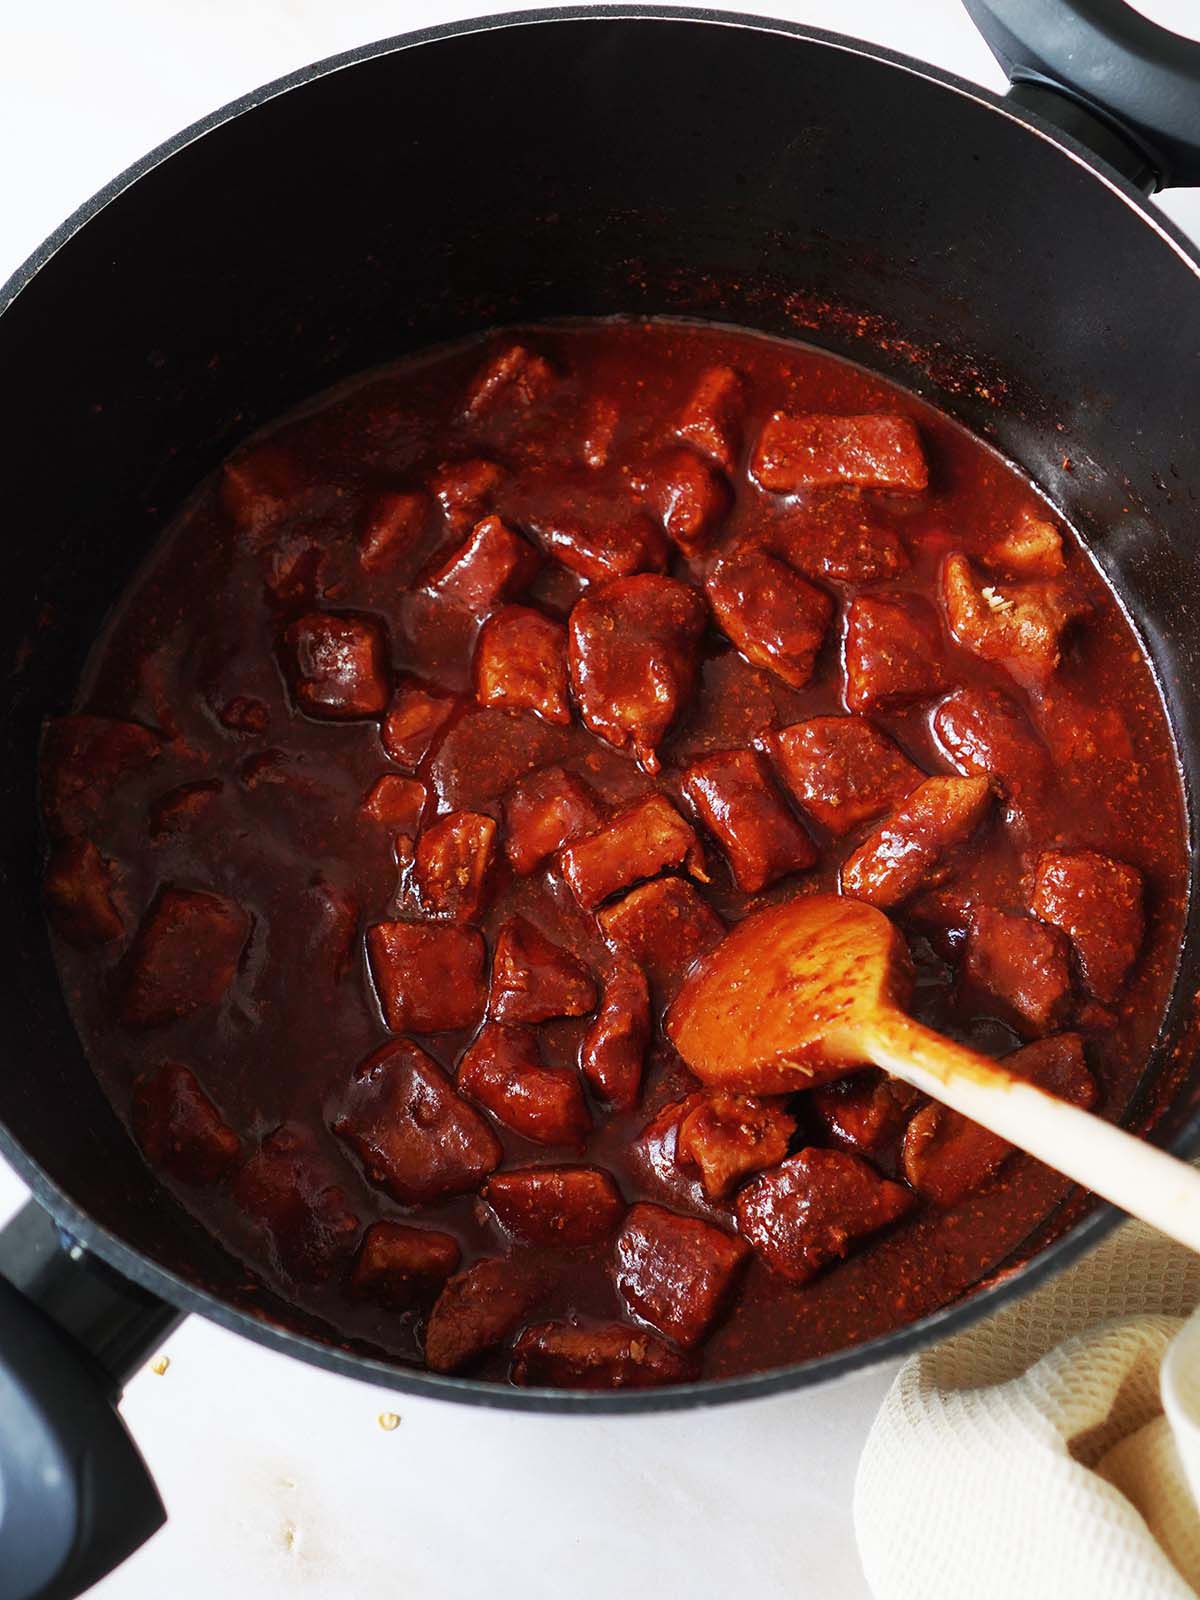 Cooking cubes of pork in a red sauce inside a large sauce pot.